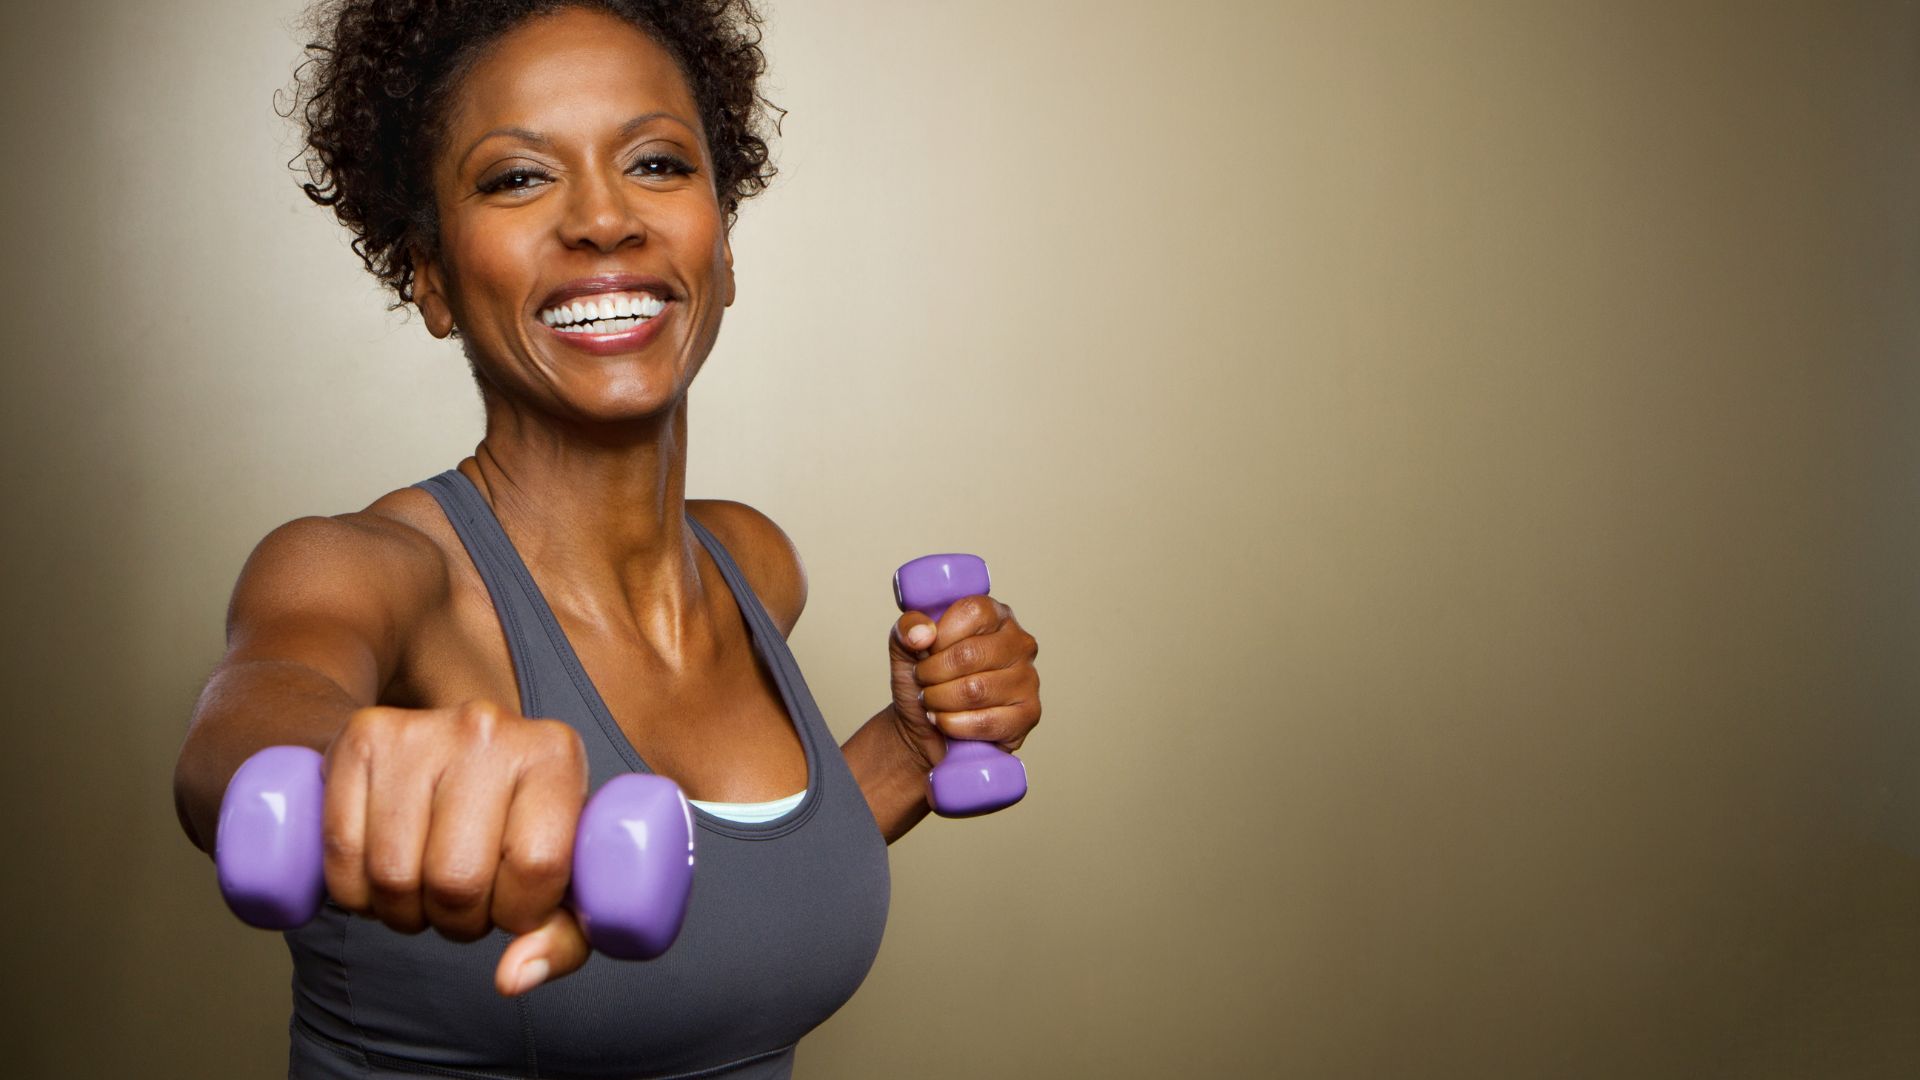 A woman holding weights smiles as she exercises. Image demonstrates examples of diet and exercise.